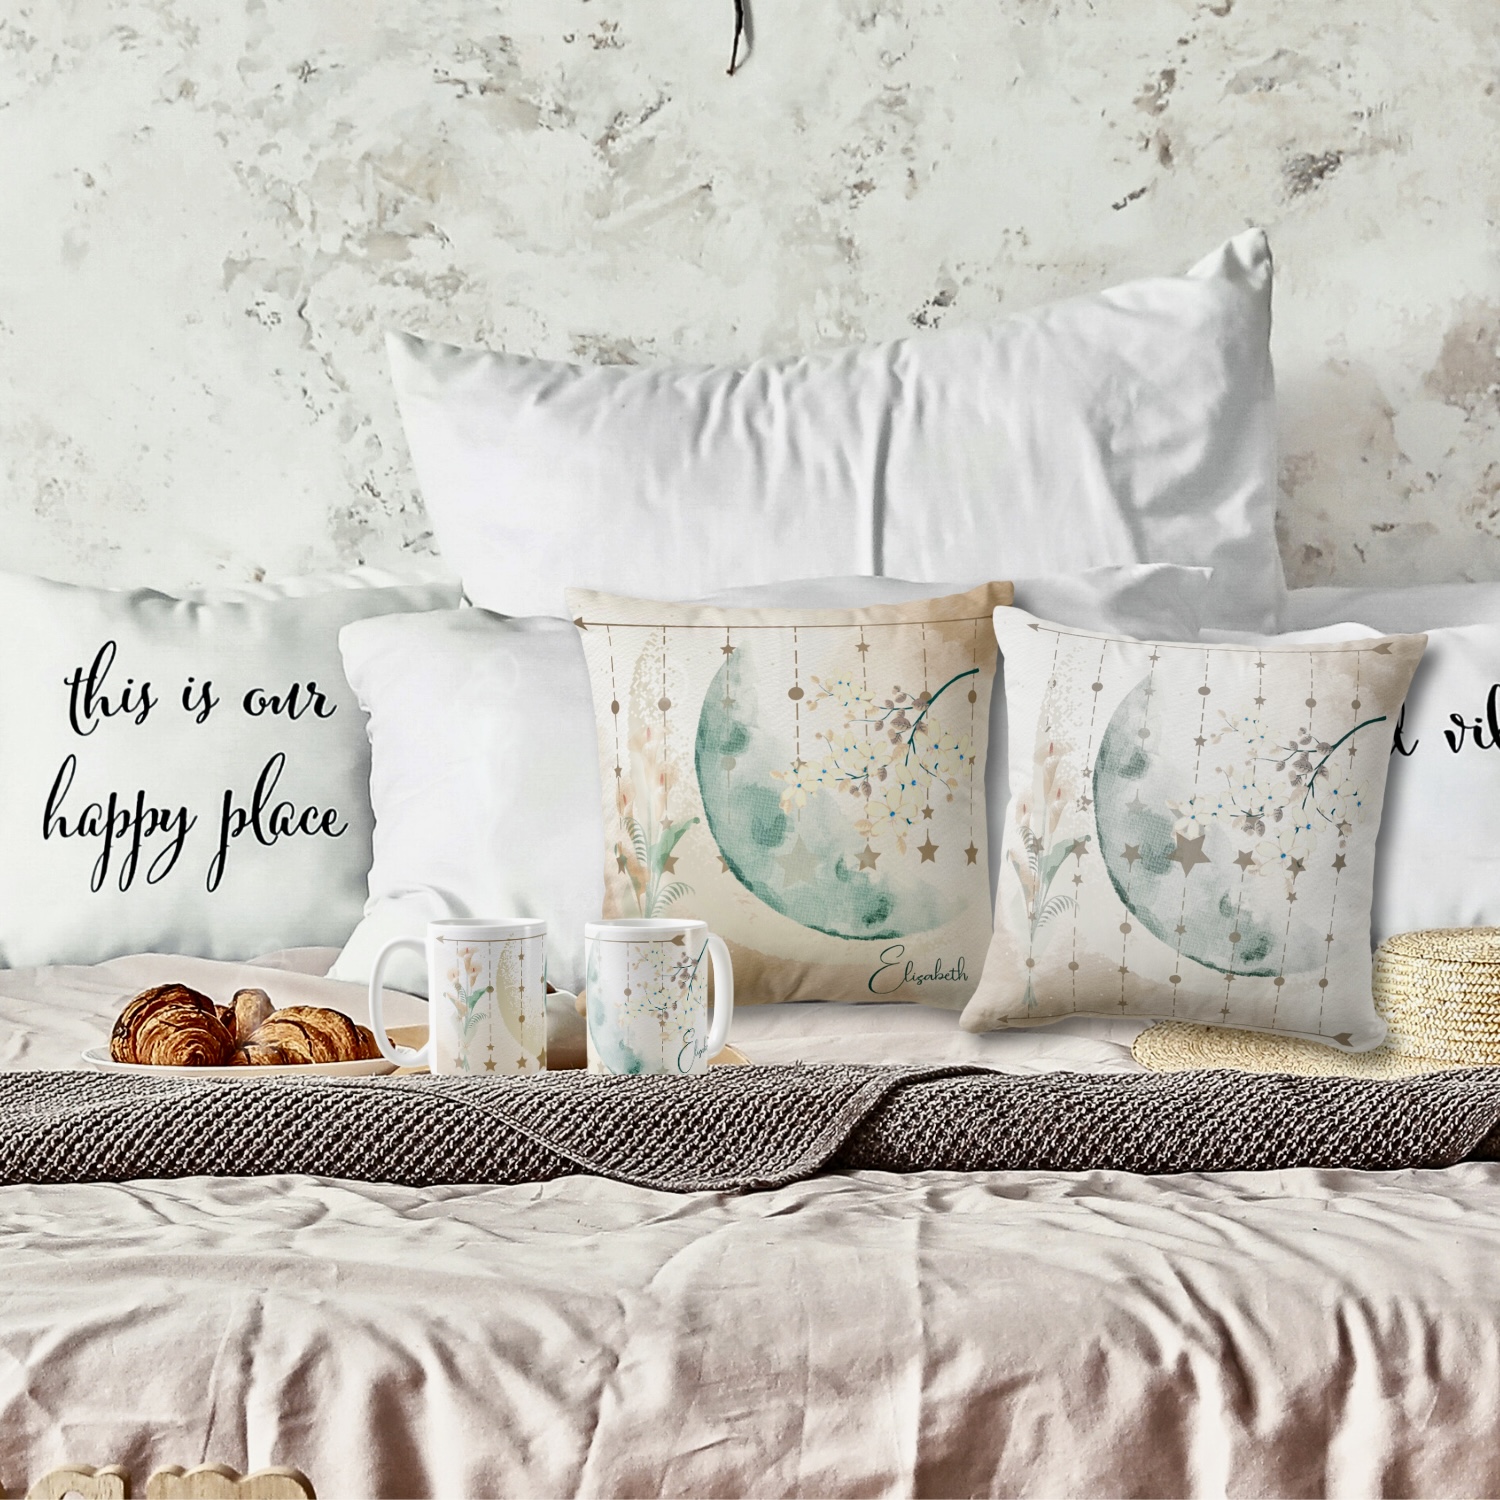 Moonlit Flowers Decorative Mug and Pillow Set on Bed - Crafted with soothing earthy tones and delicate floral details, these pieces create a serene oasis in your space. Embrace self-expression with our charming collection.